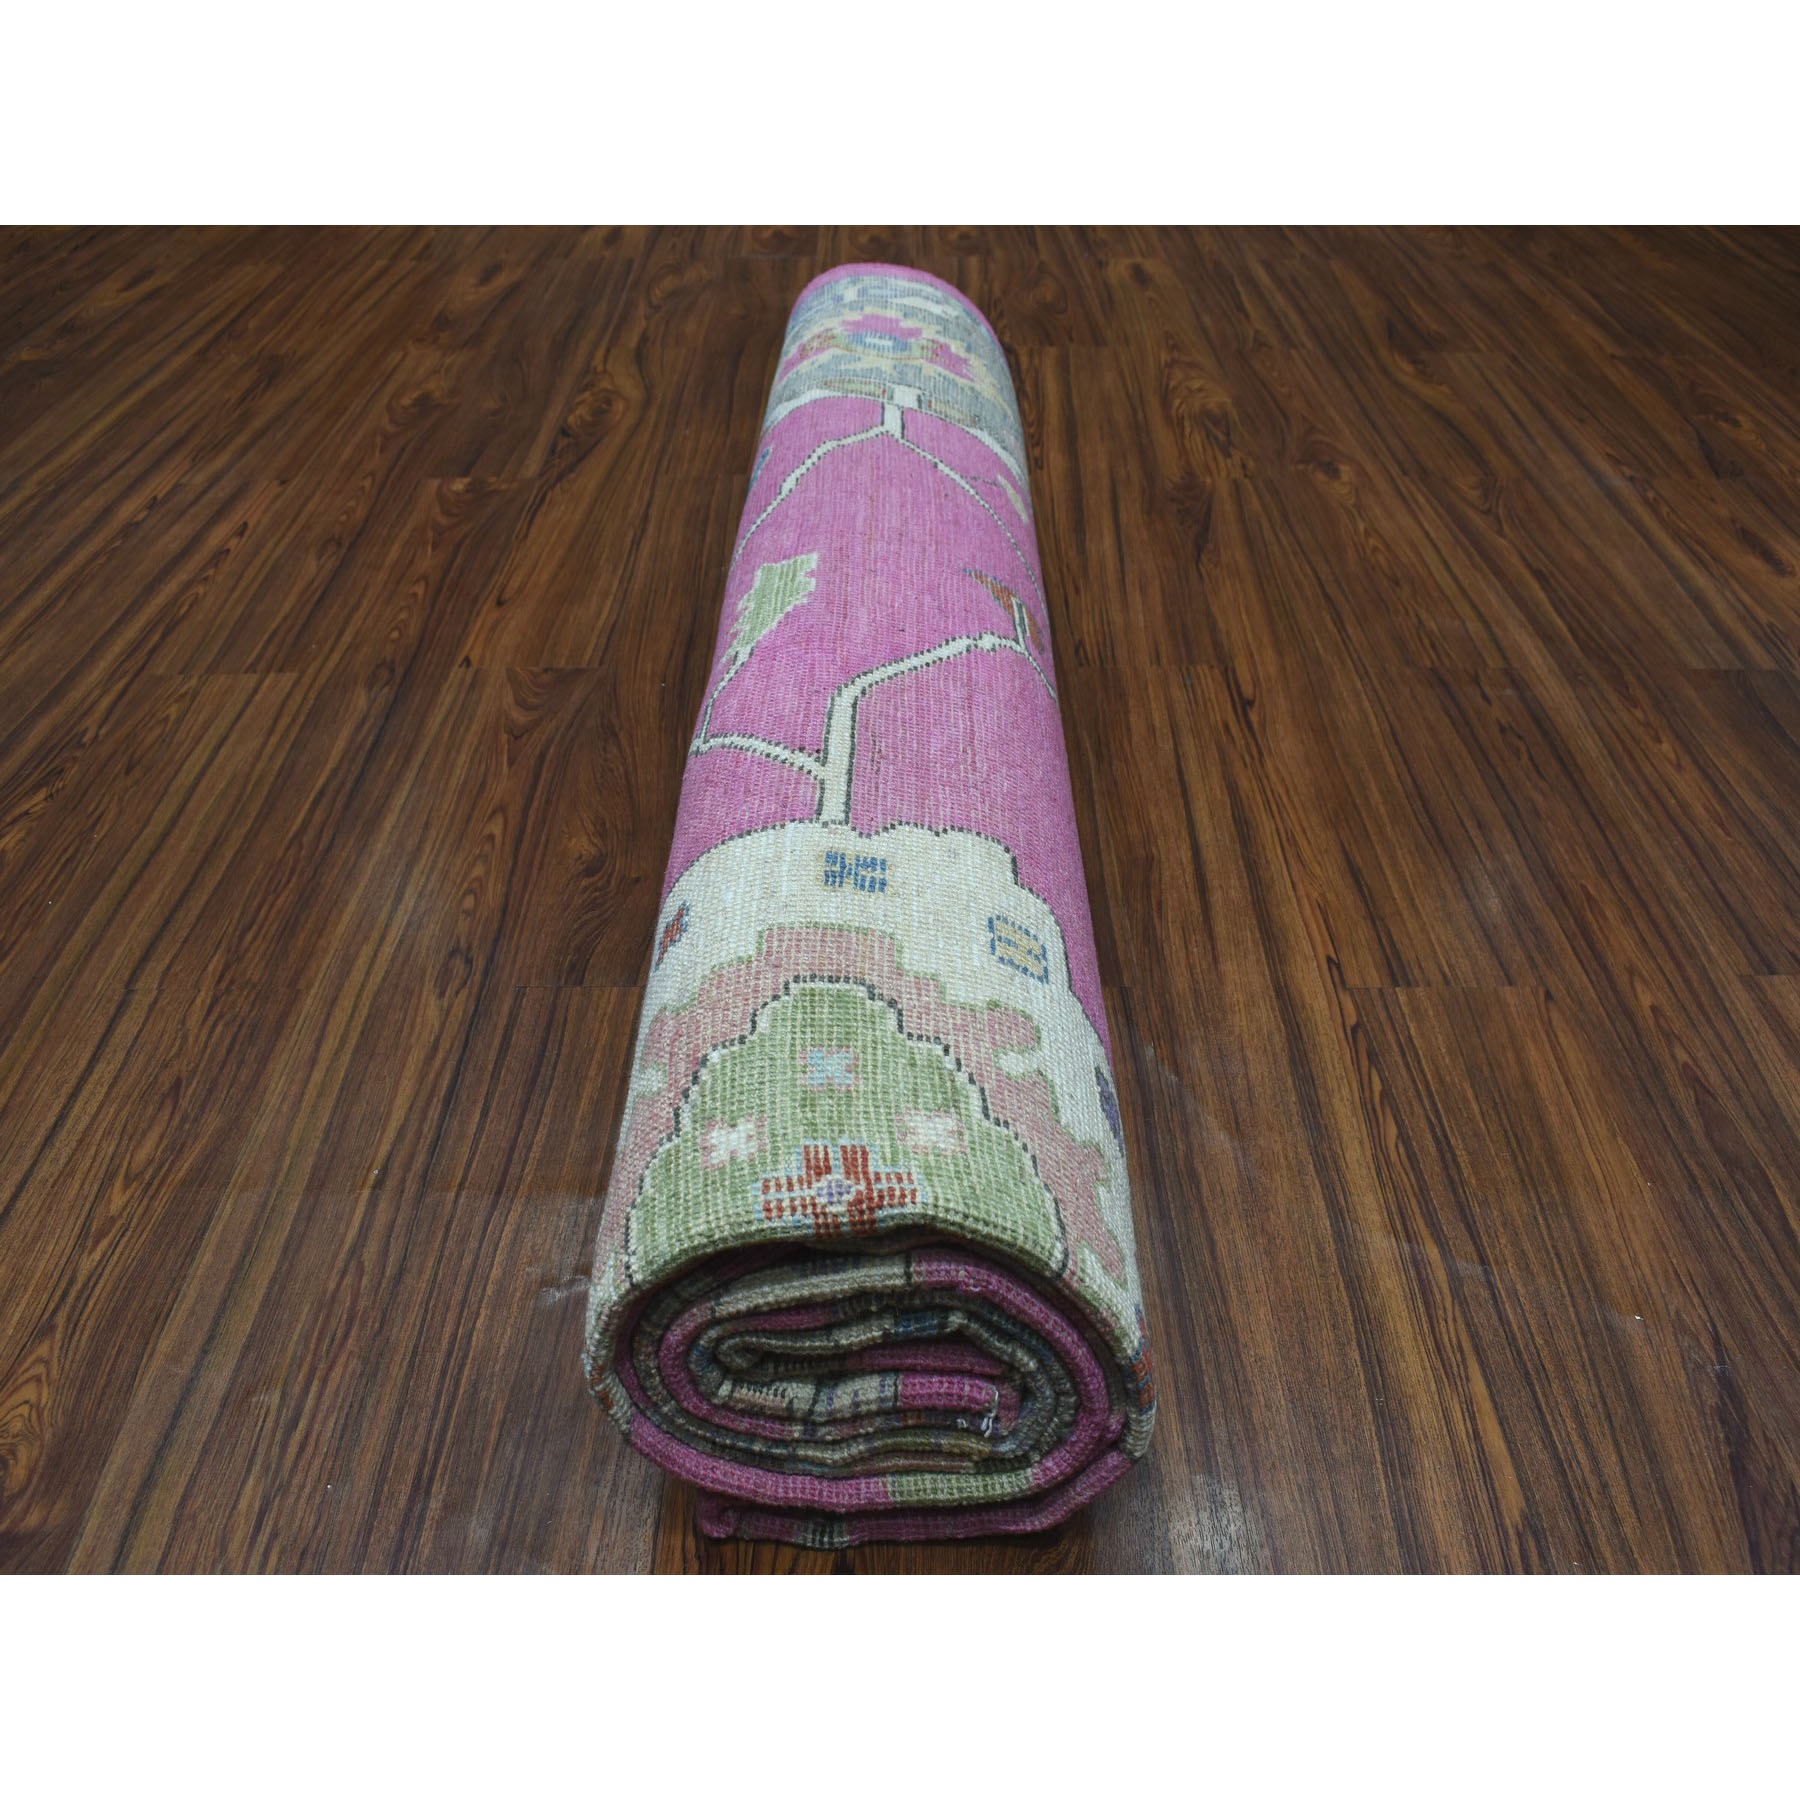 9-x11-3  Hot Pink Angora Oushak Super Bright Soft Wool Hand Knotted Oriental Rug 